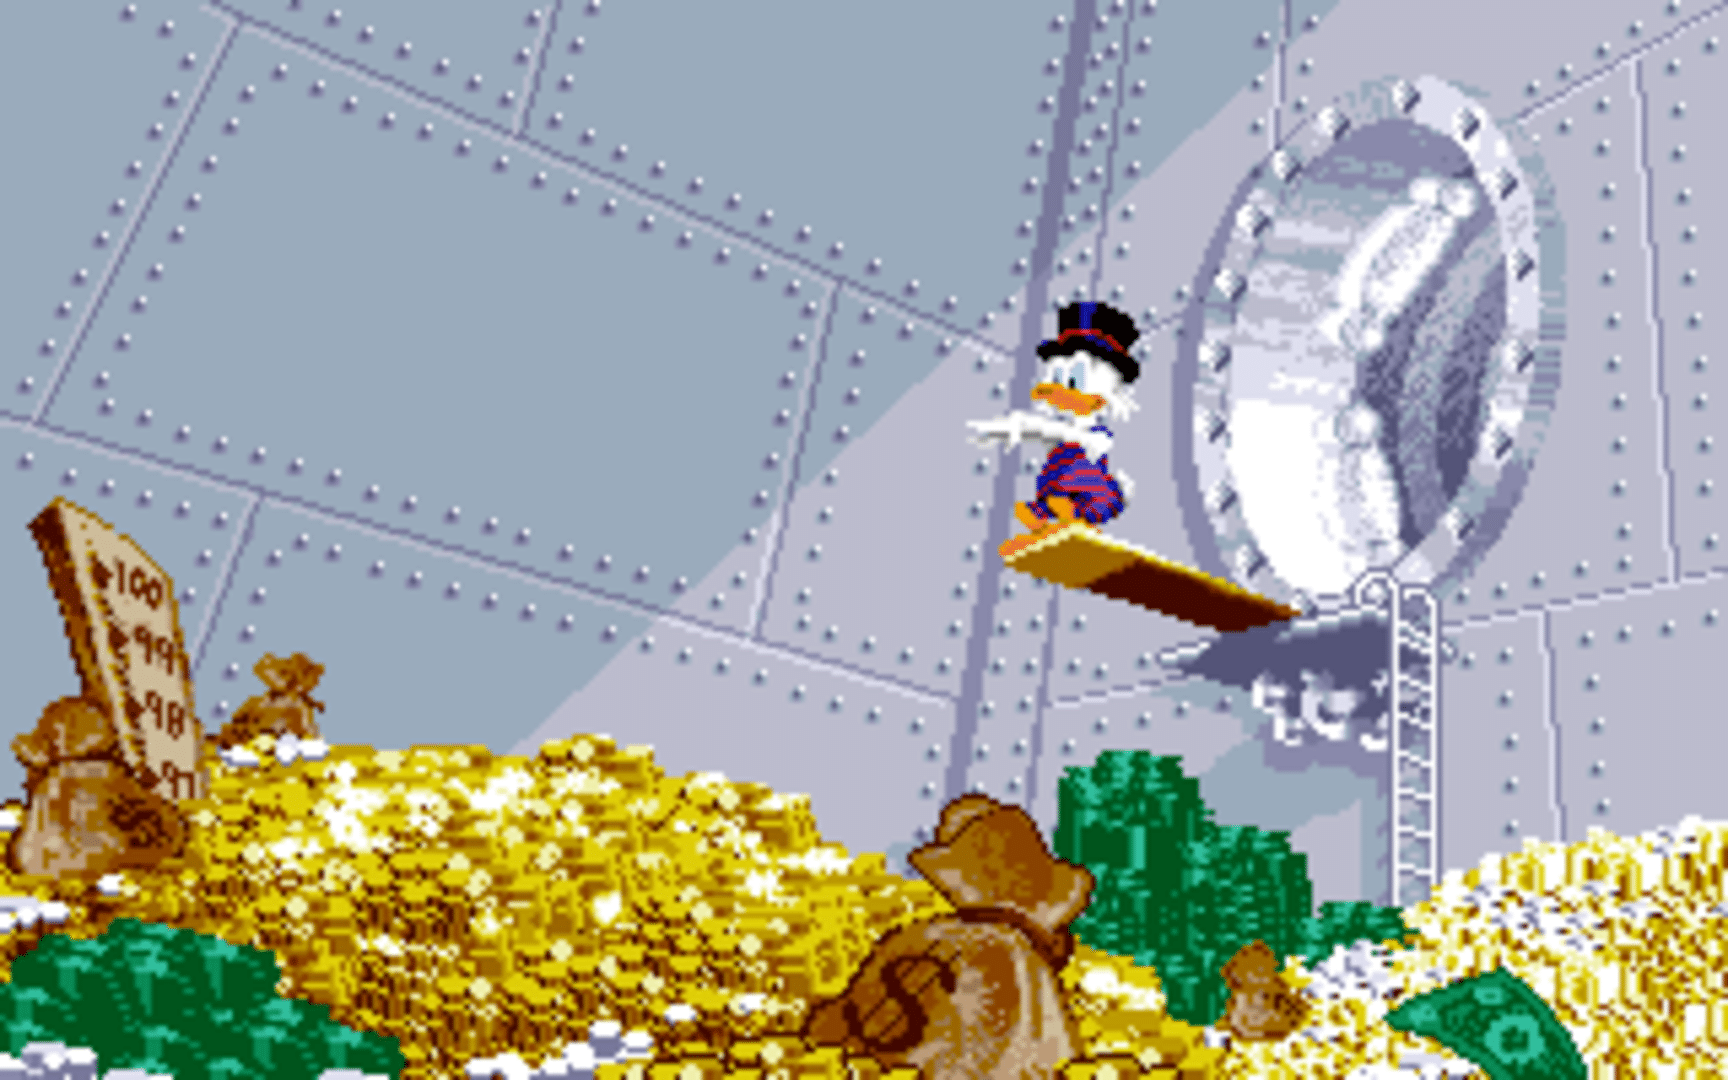 Disney's DuckTales: The Quest for Gold screenshot